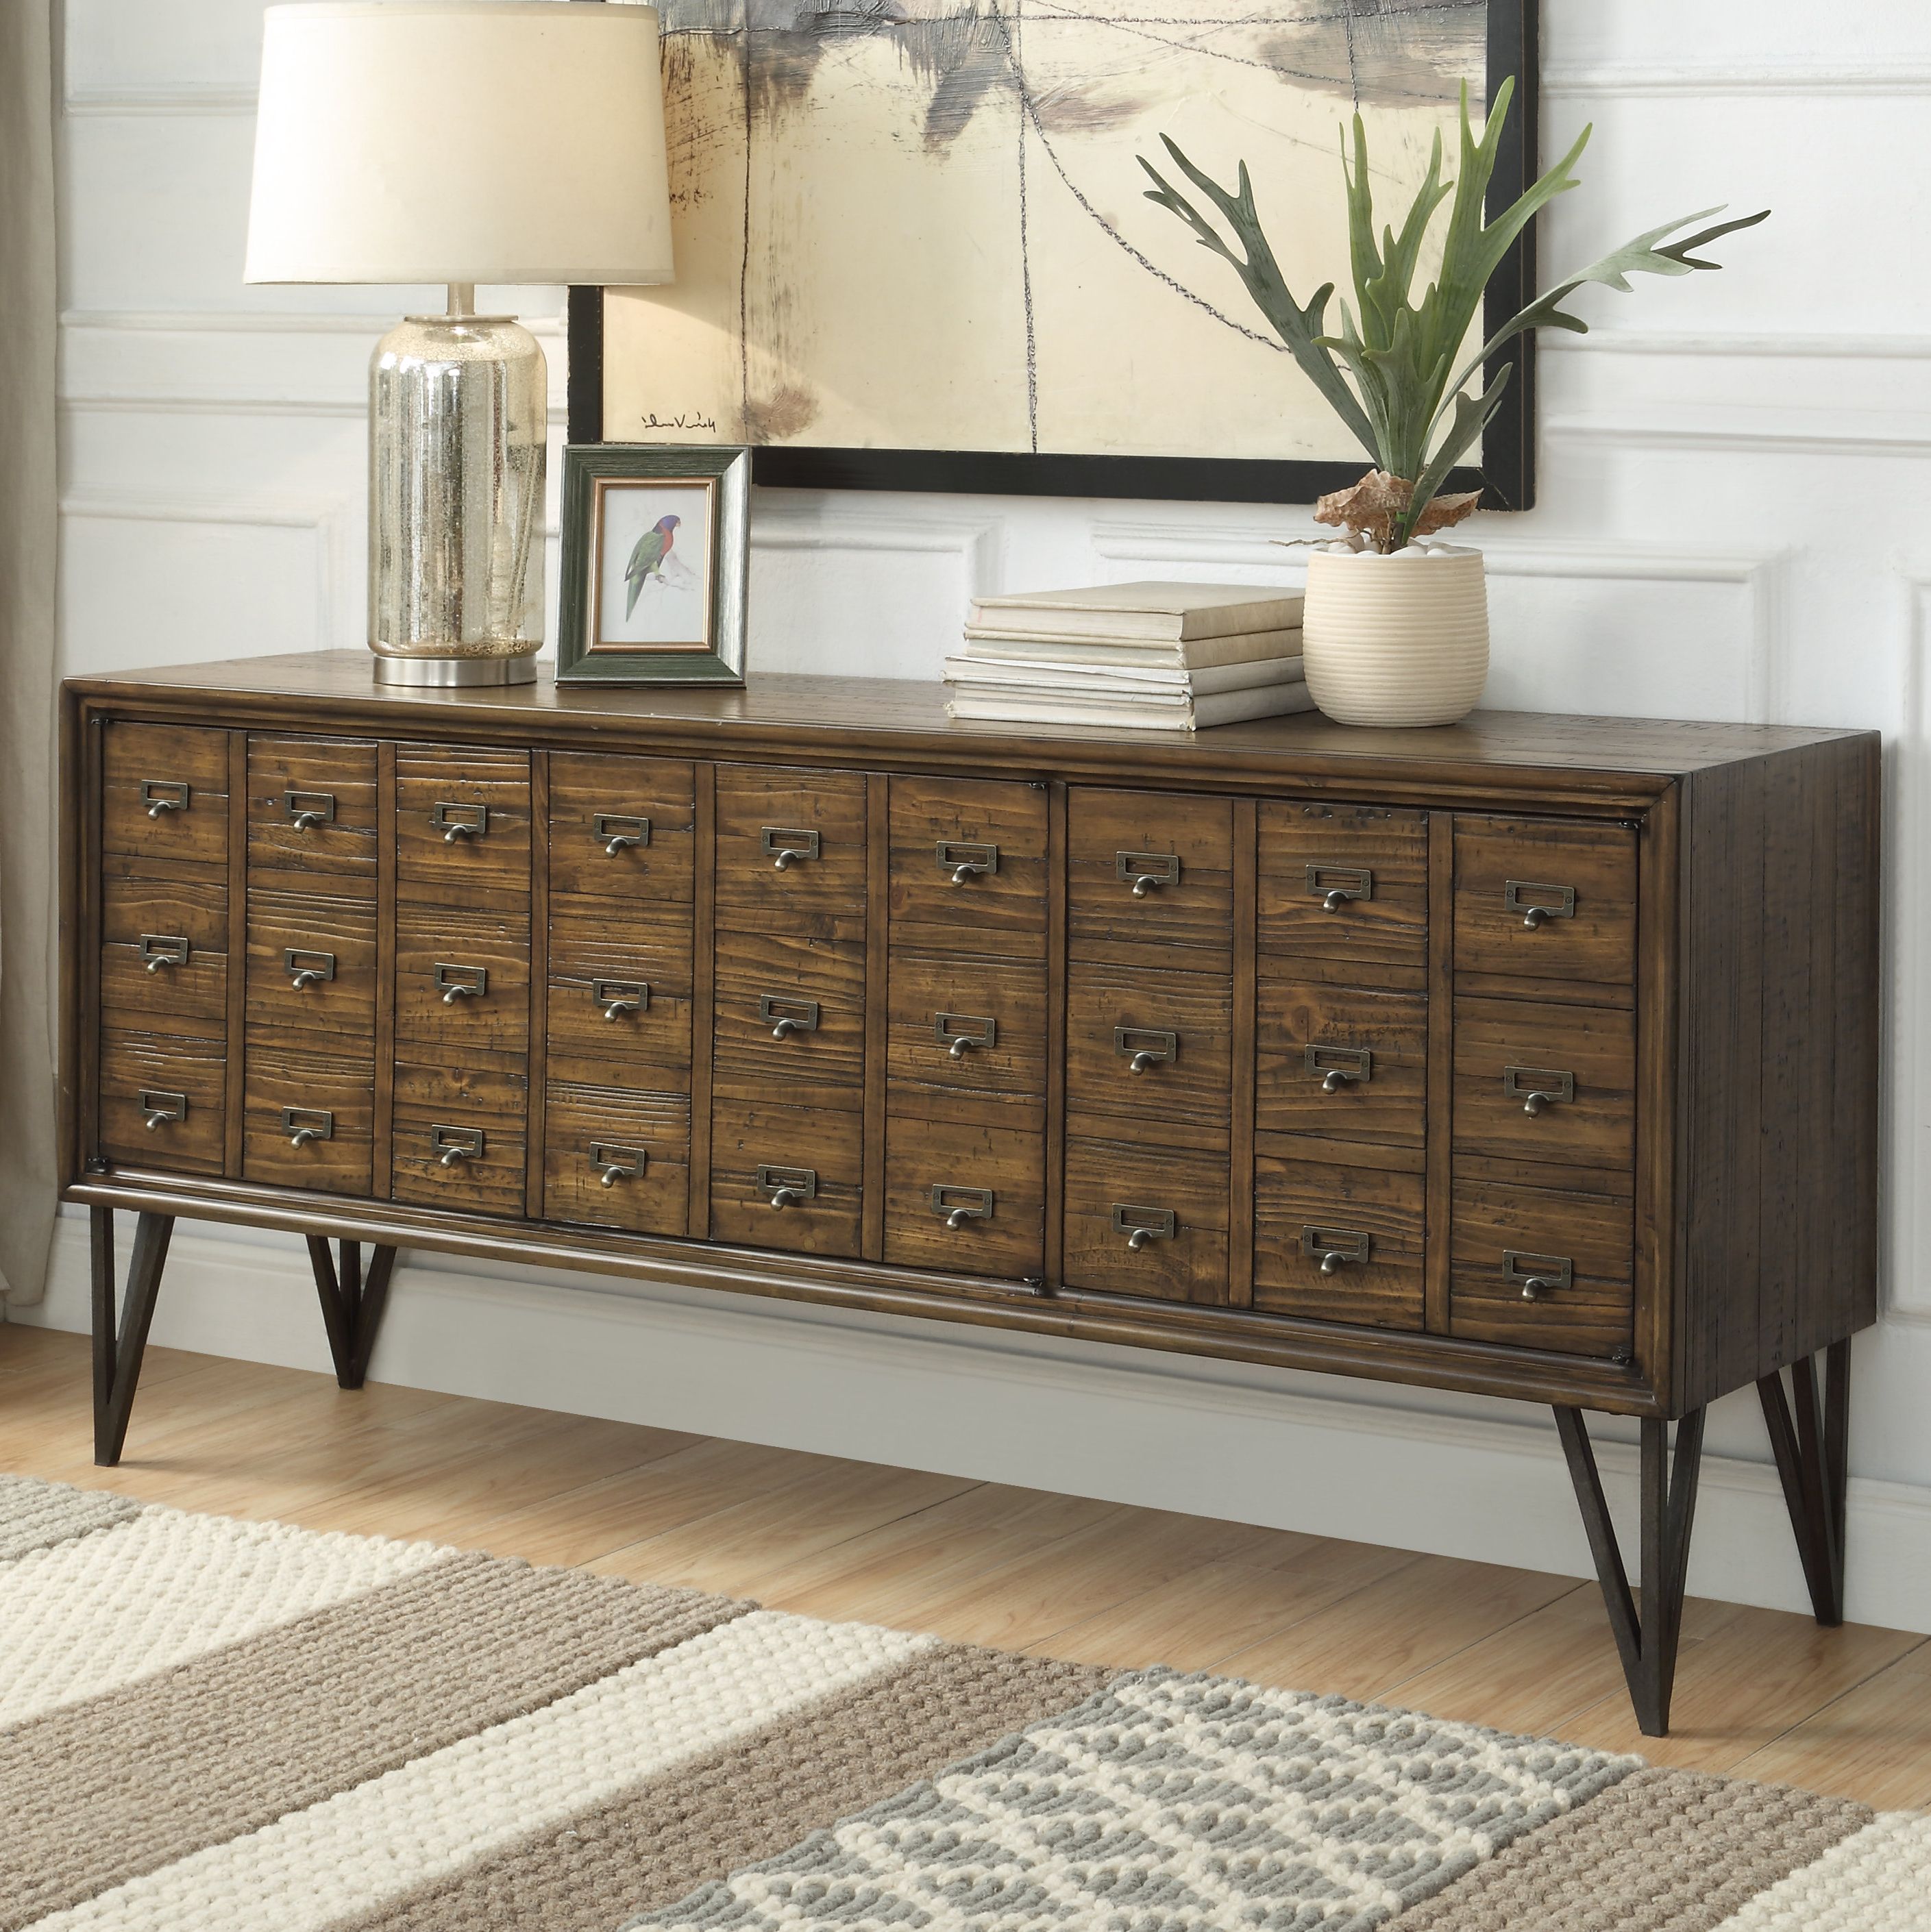 70 Inch Credenza | Wayfair Intended For Stephen Credenzas (View 1 of 20)